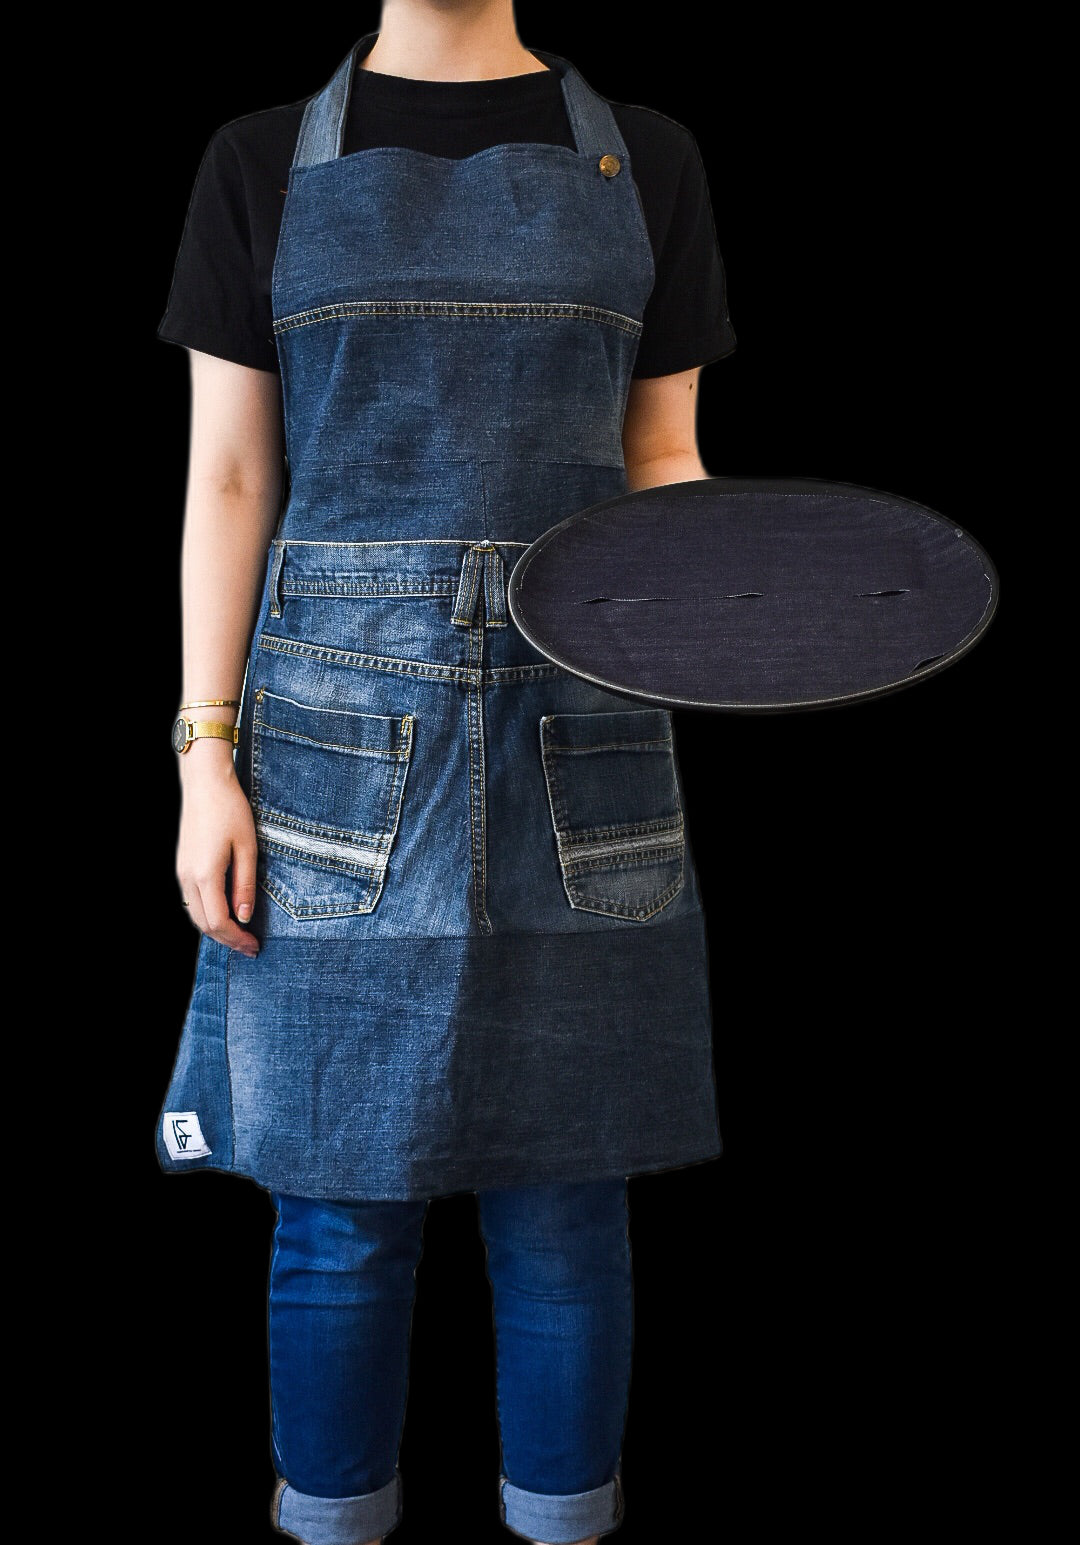 IF DENIM | Sustainable Handcrafted Apron